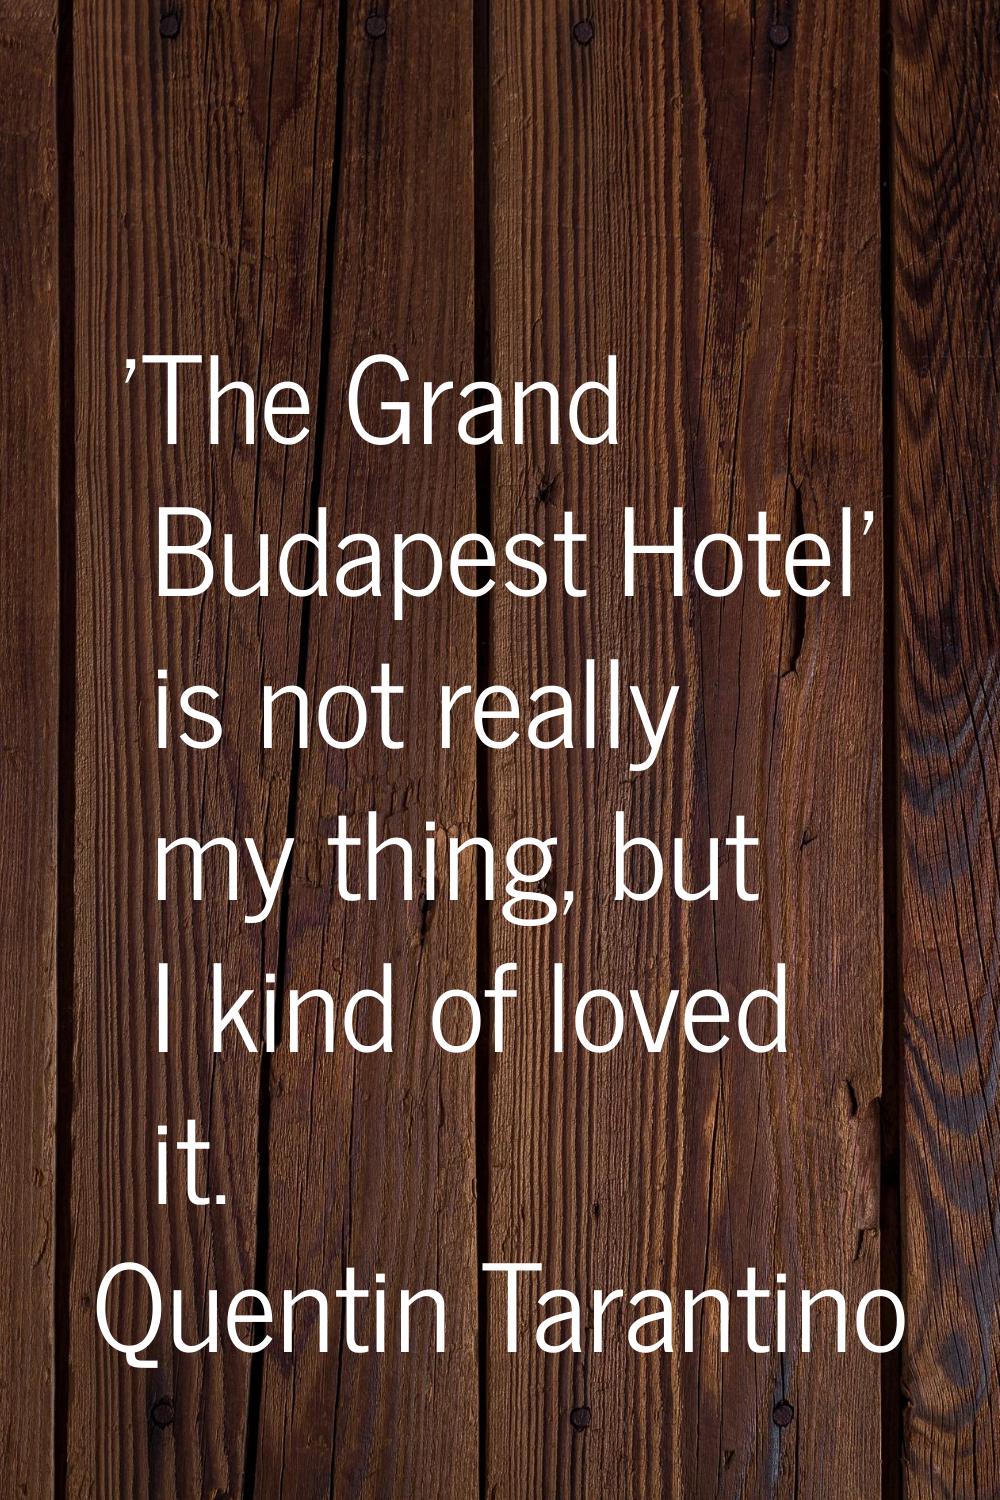 'The Grand Budapest Hotel' is not really my thing, but I kind of loved it.